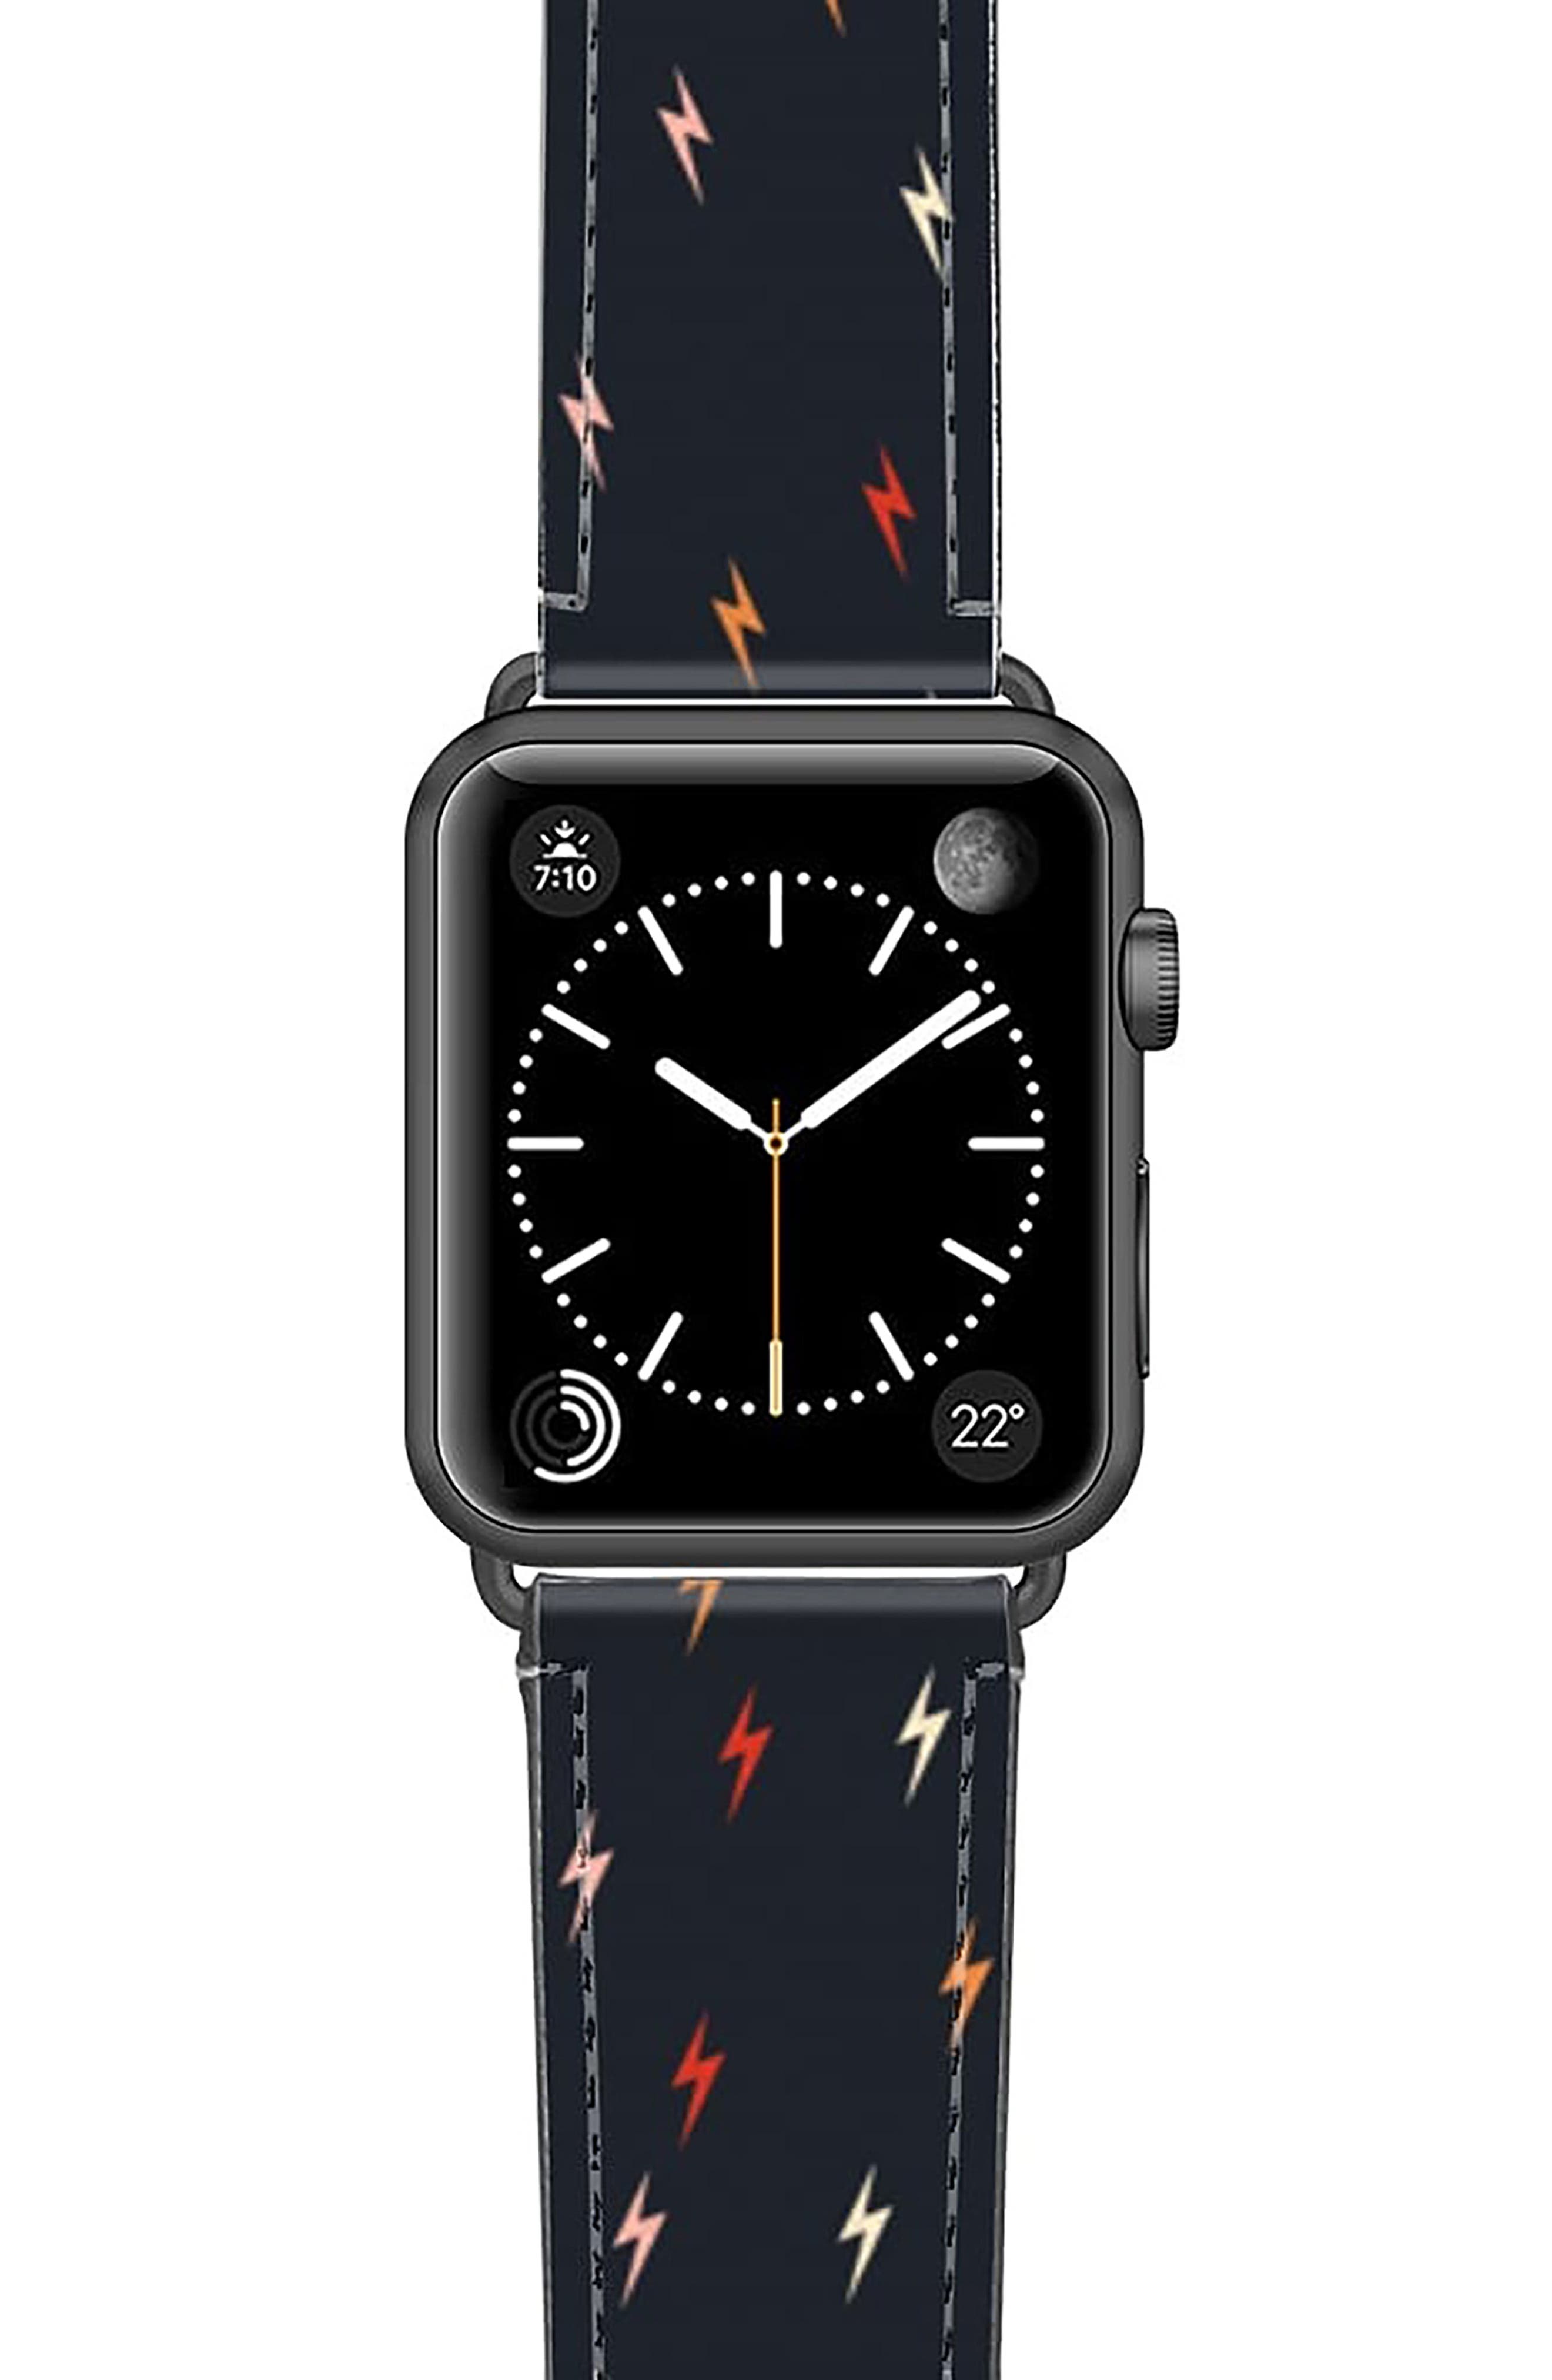 CASETiFY Pass the Bolt Saffiano Faux Leather Apple Watch Band in Black/Space Grey